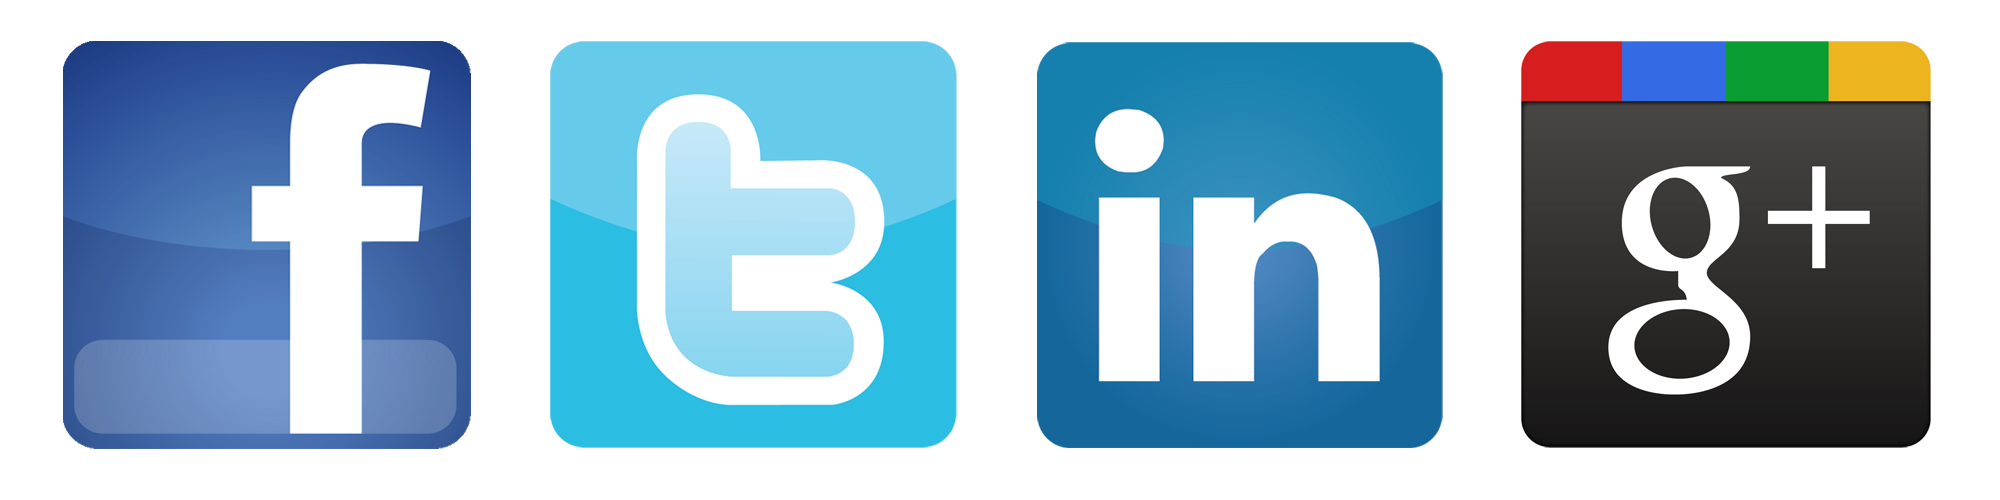 Facebook and twitter icons png. Contact new tech community